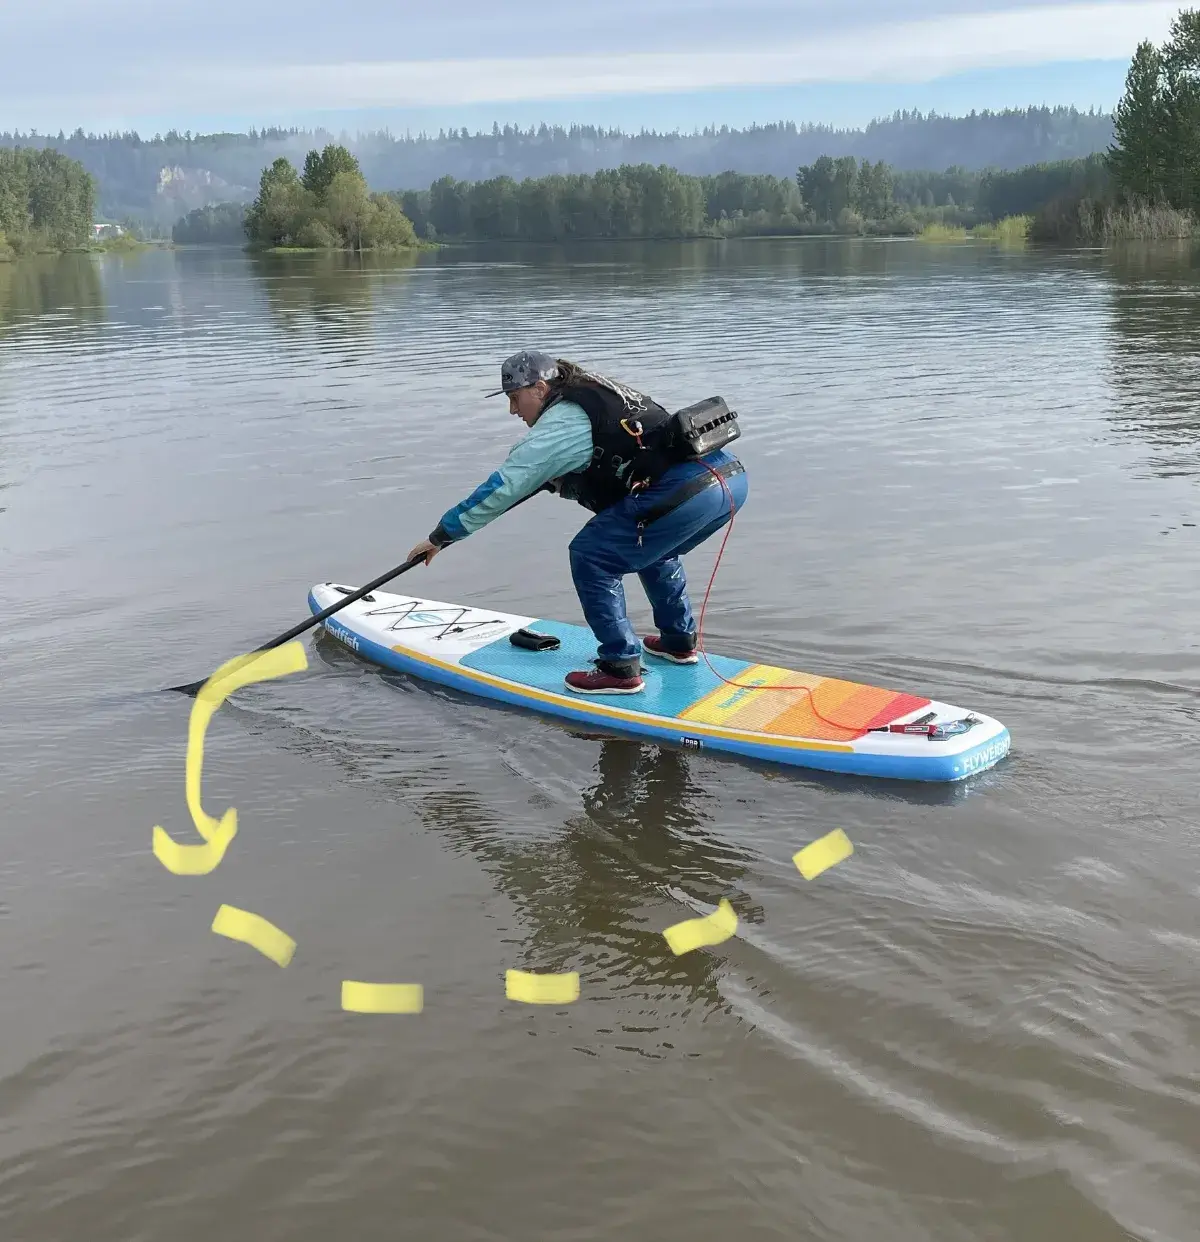 How to Sweep Stroke for SUP: 4 Steps